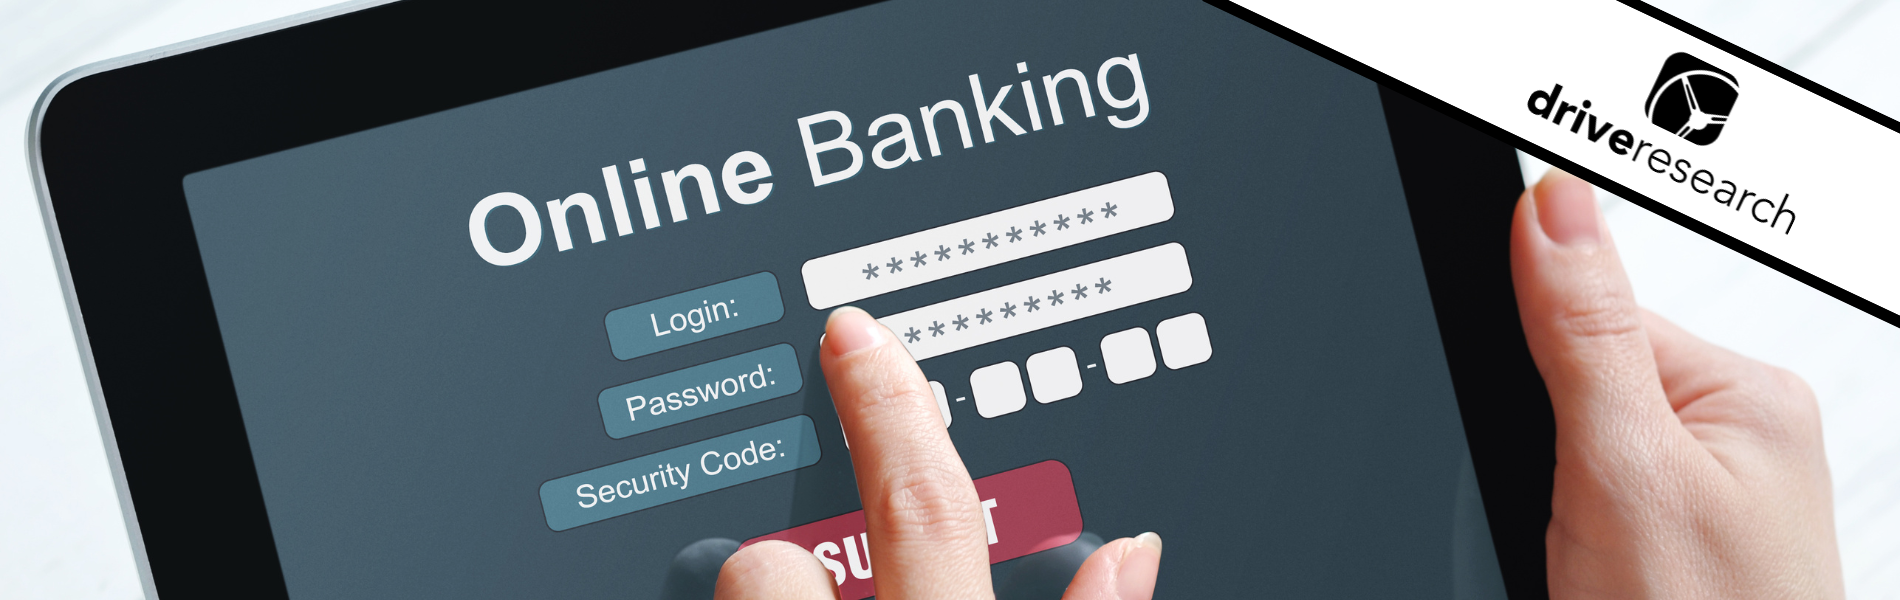 online banking concept